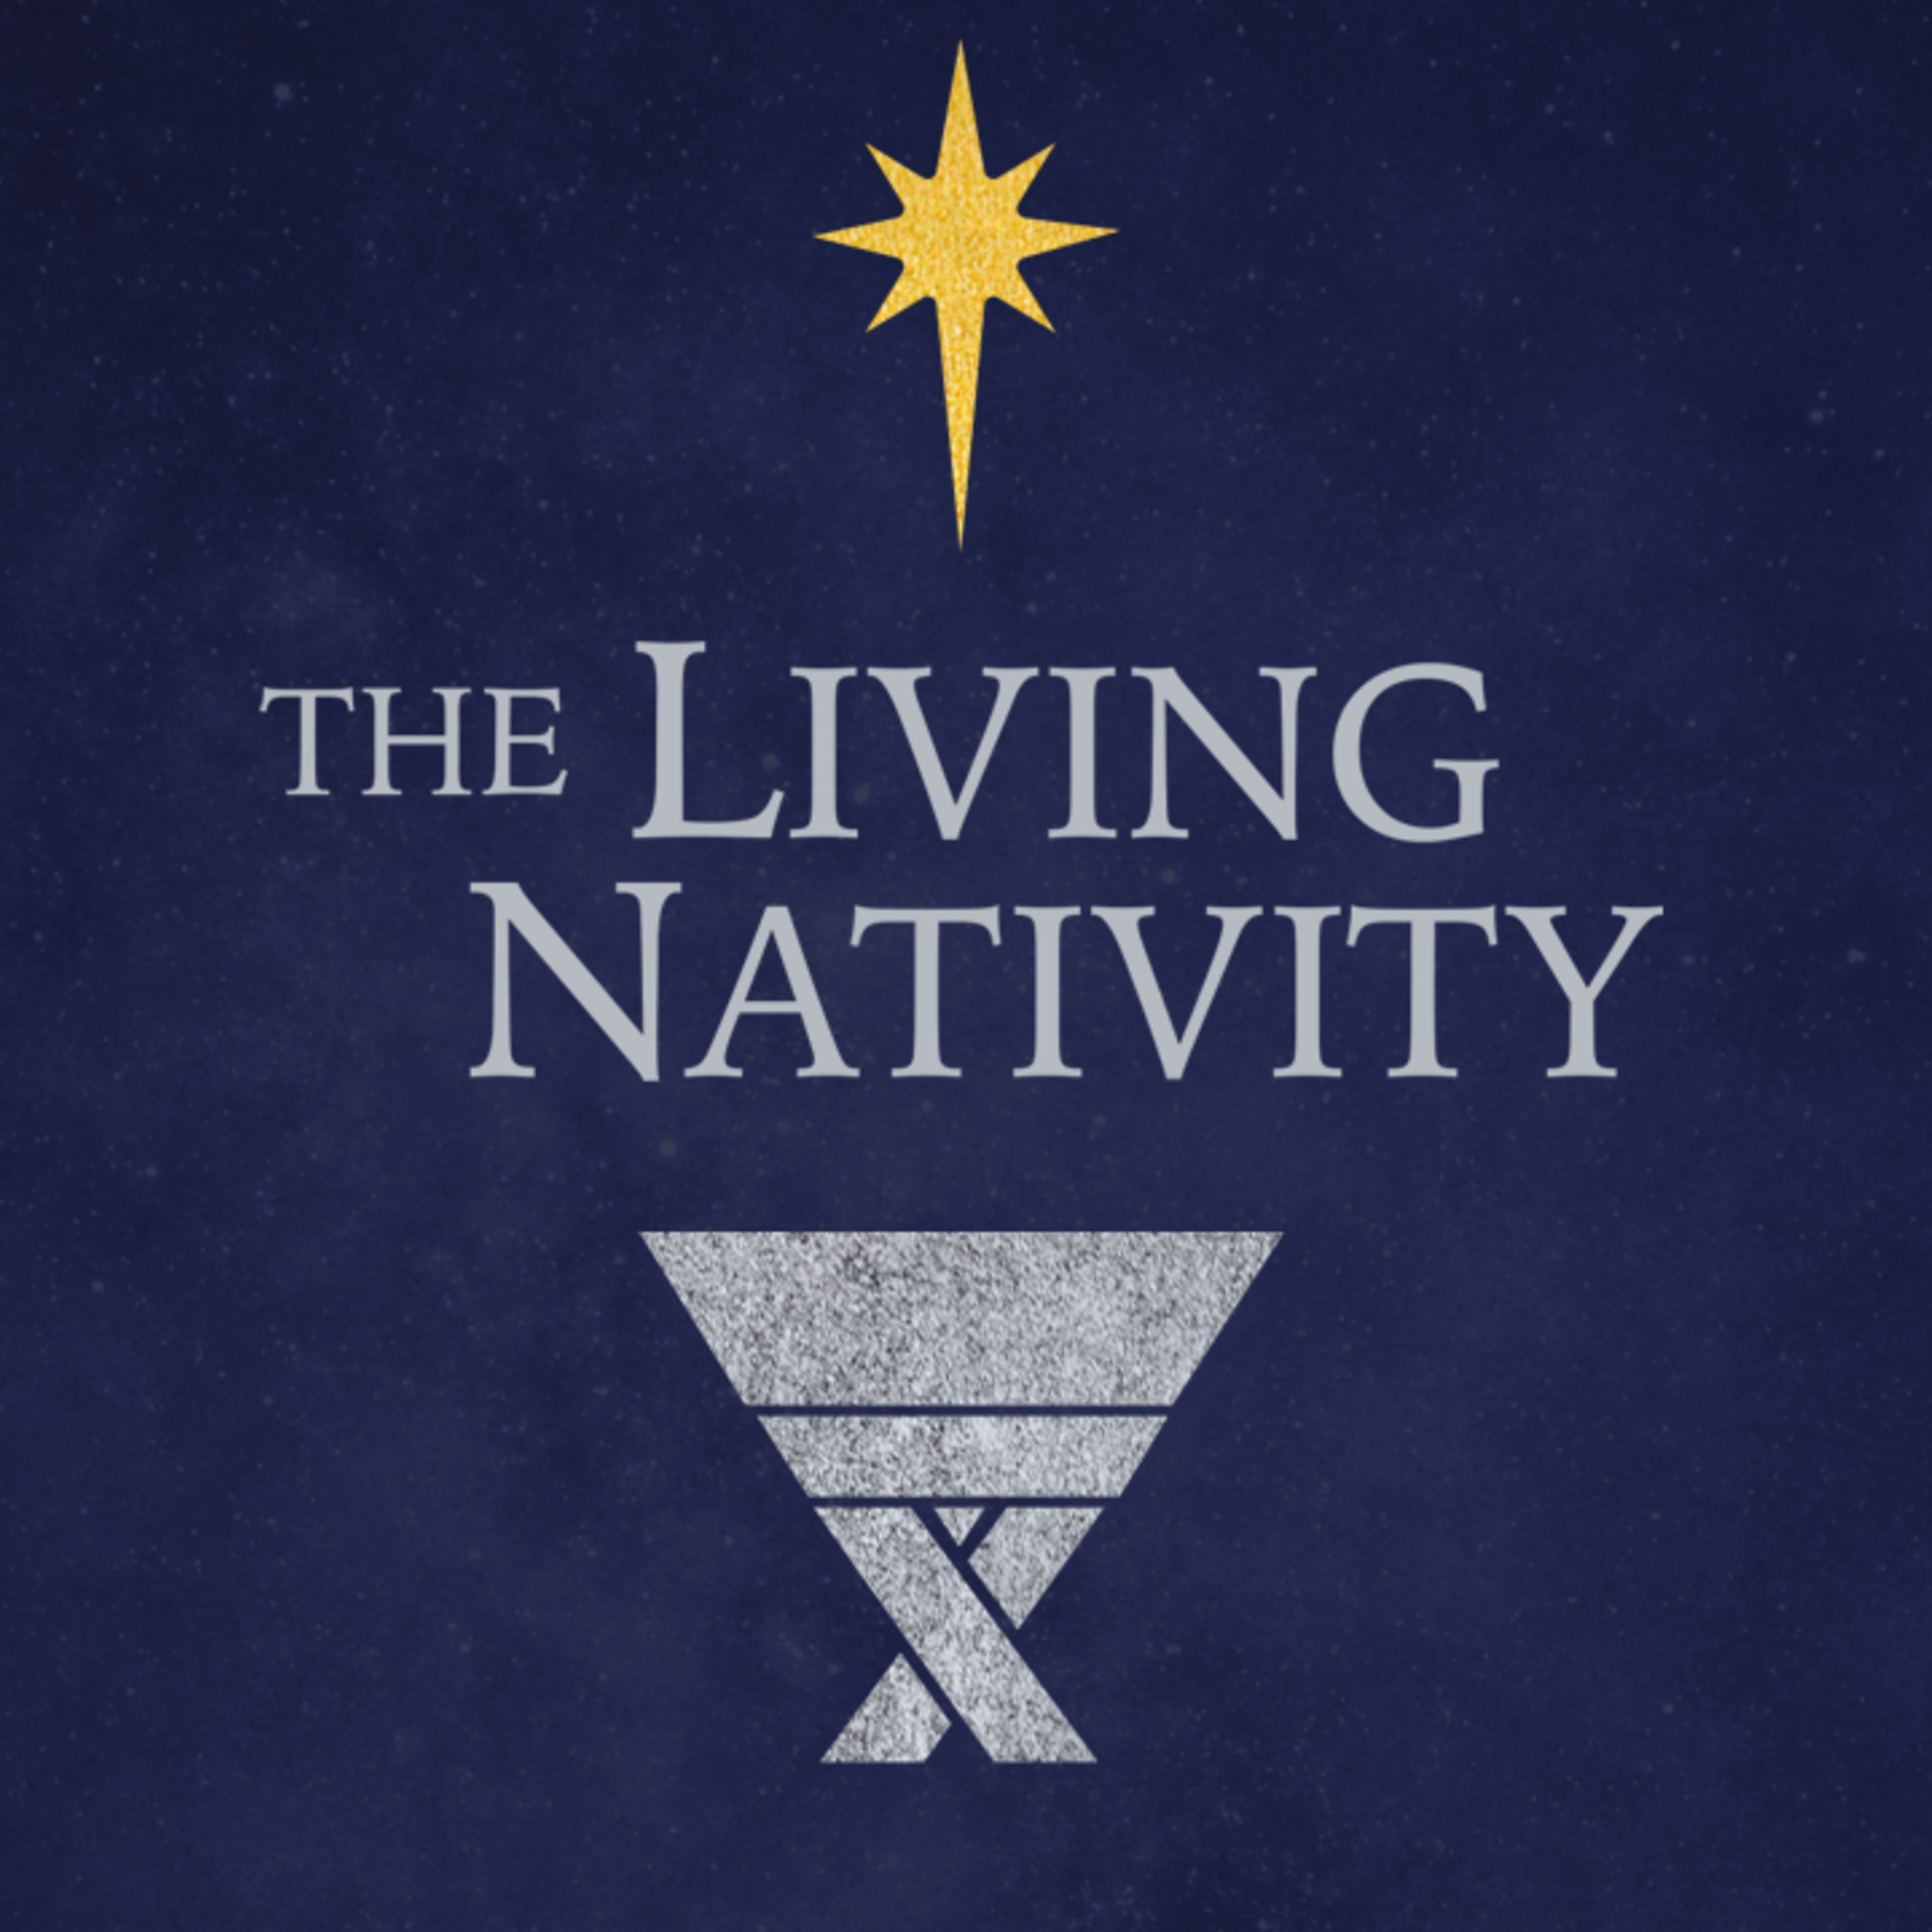 Episode 96: Roswell Presbyterian Church  |  The Living Nativity: The King Is Dead - Long Live the King  |  Sunday, December 27, 2020